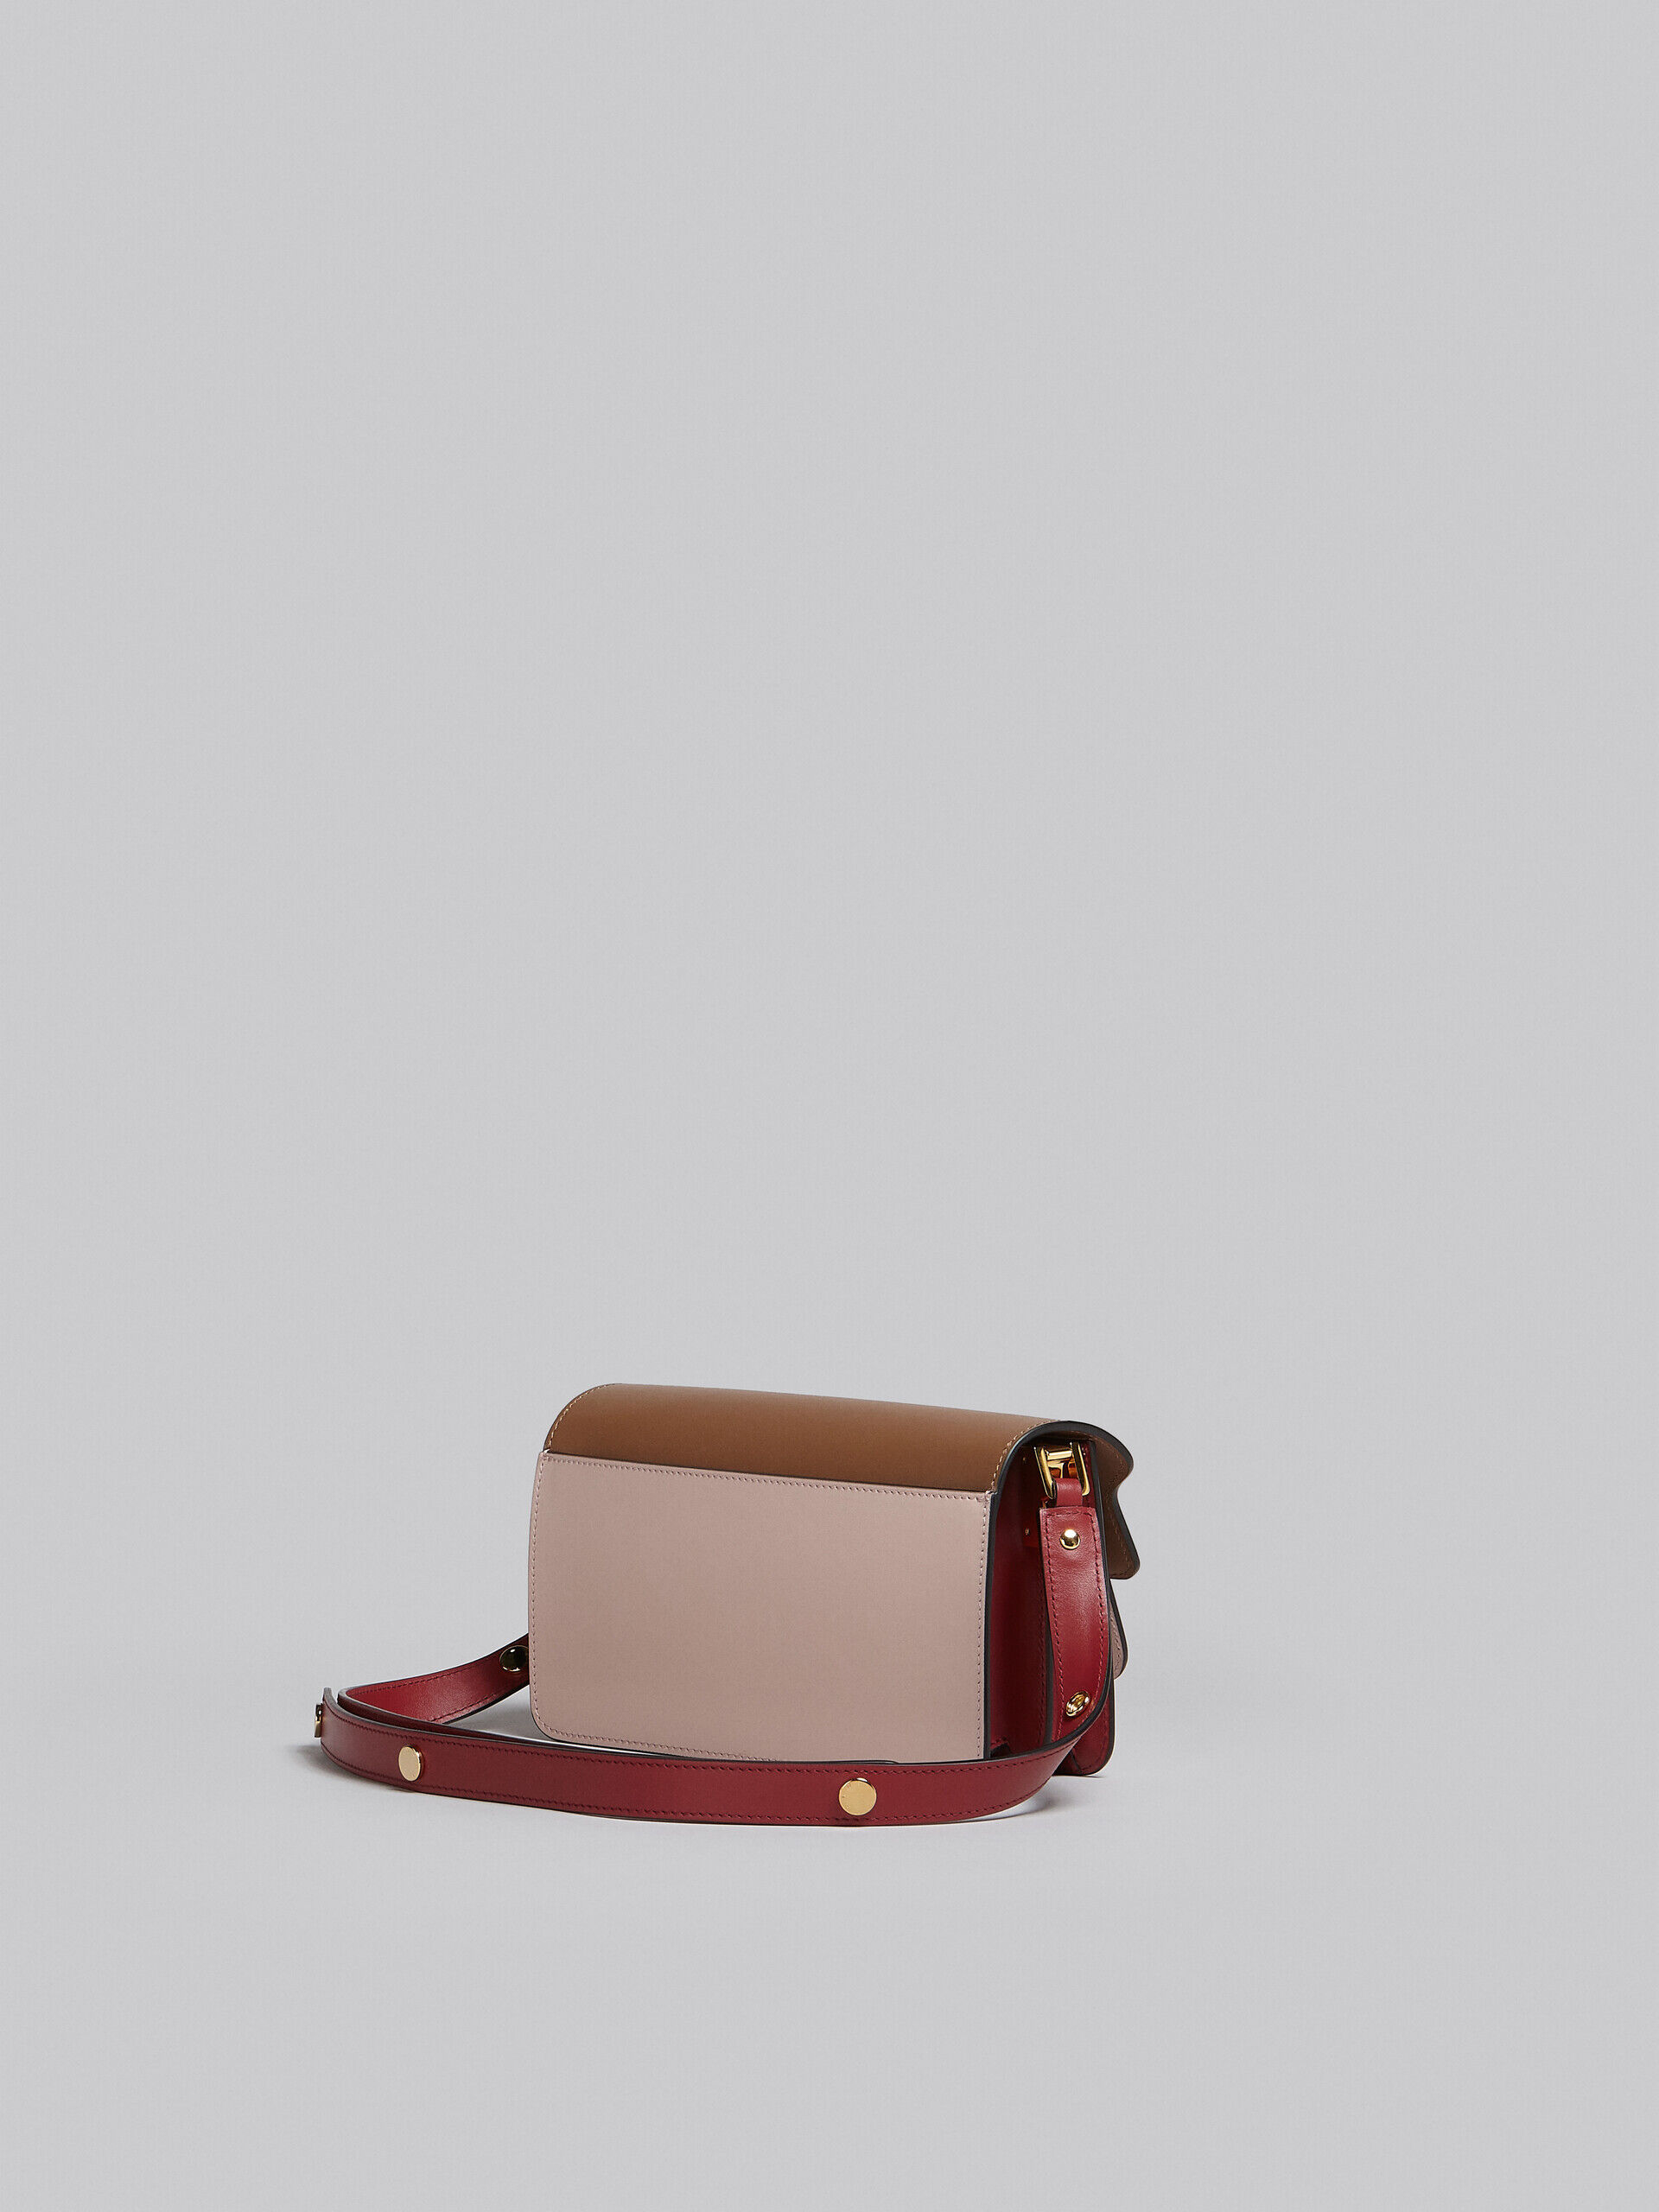 Trunk Bag E/W in brown pink and red leather | Marni